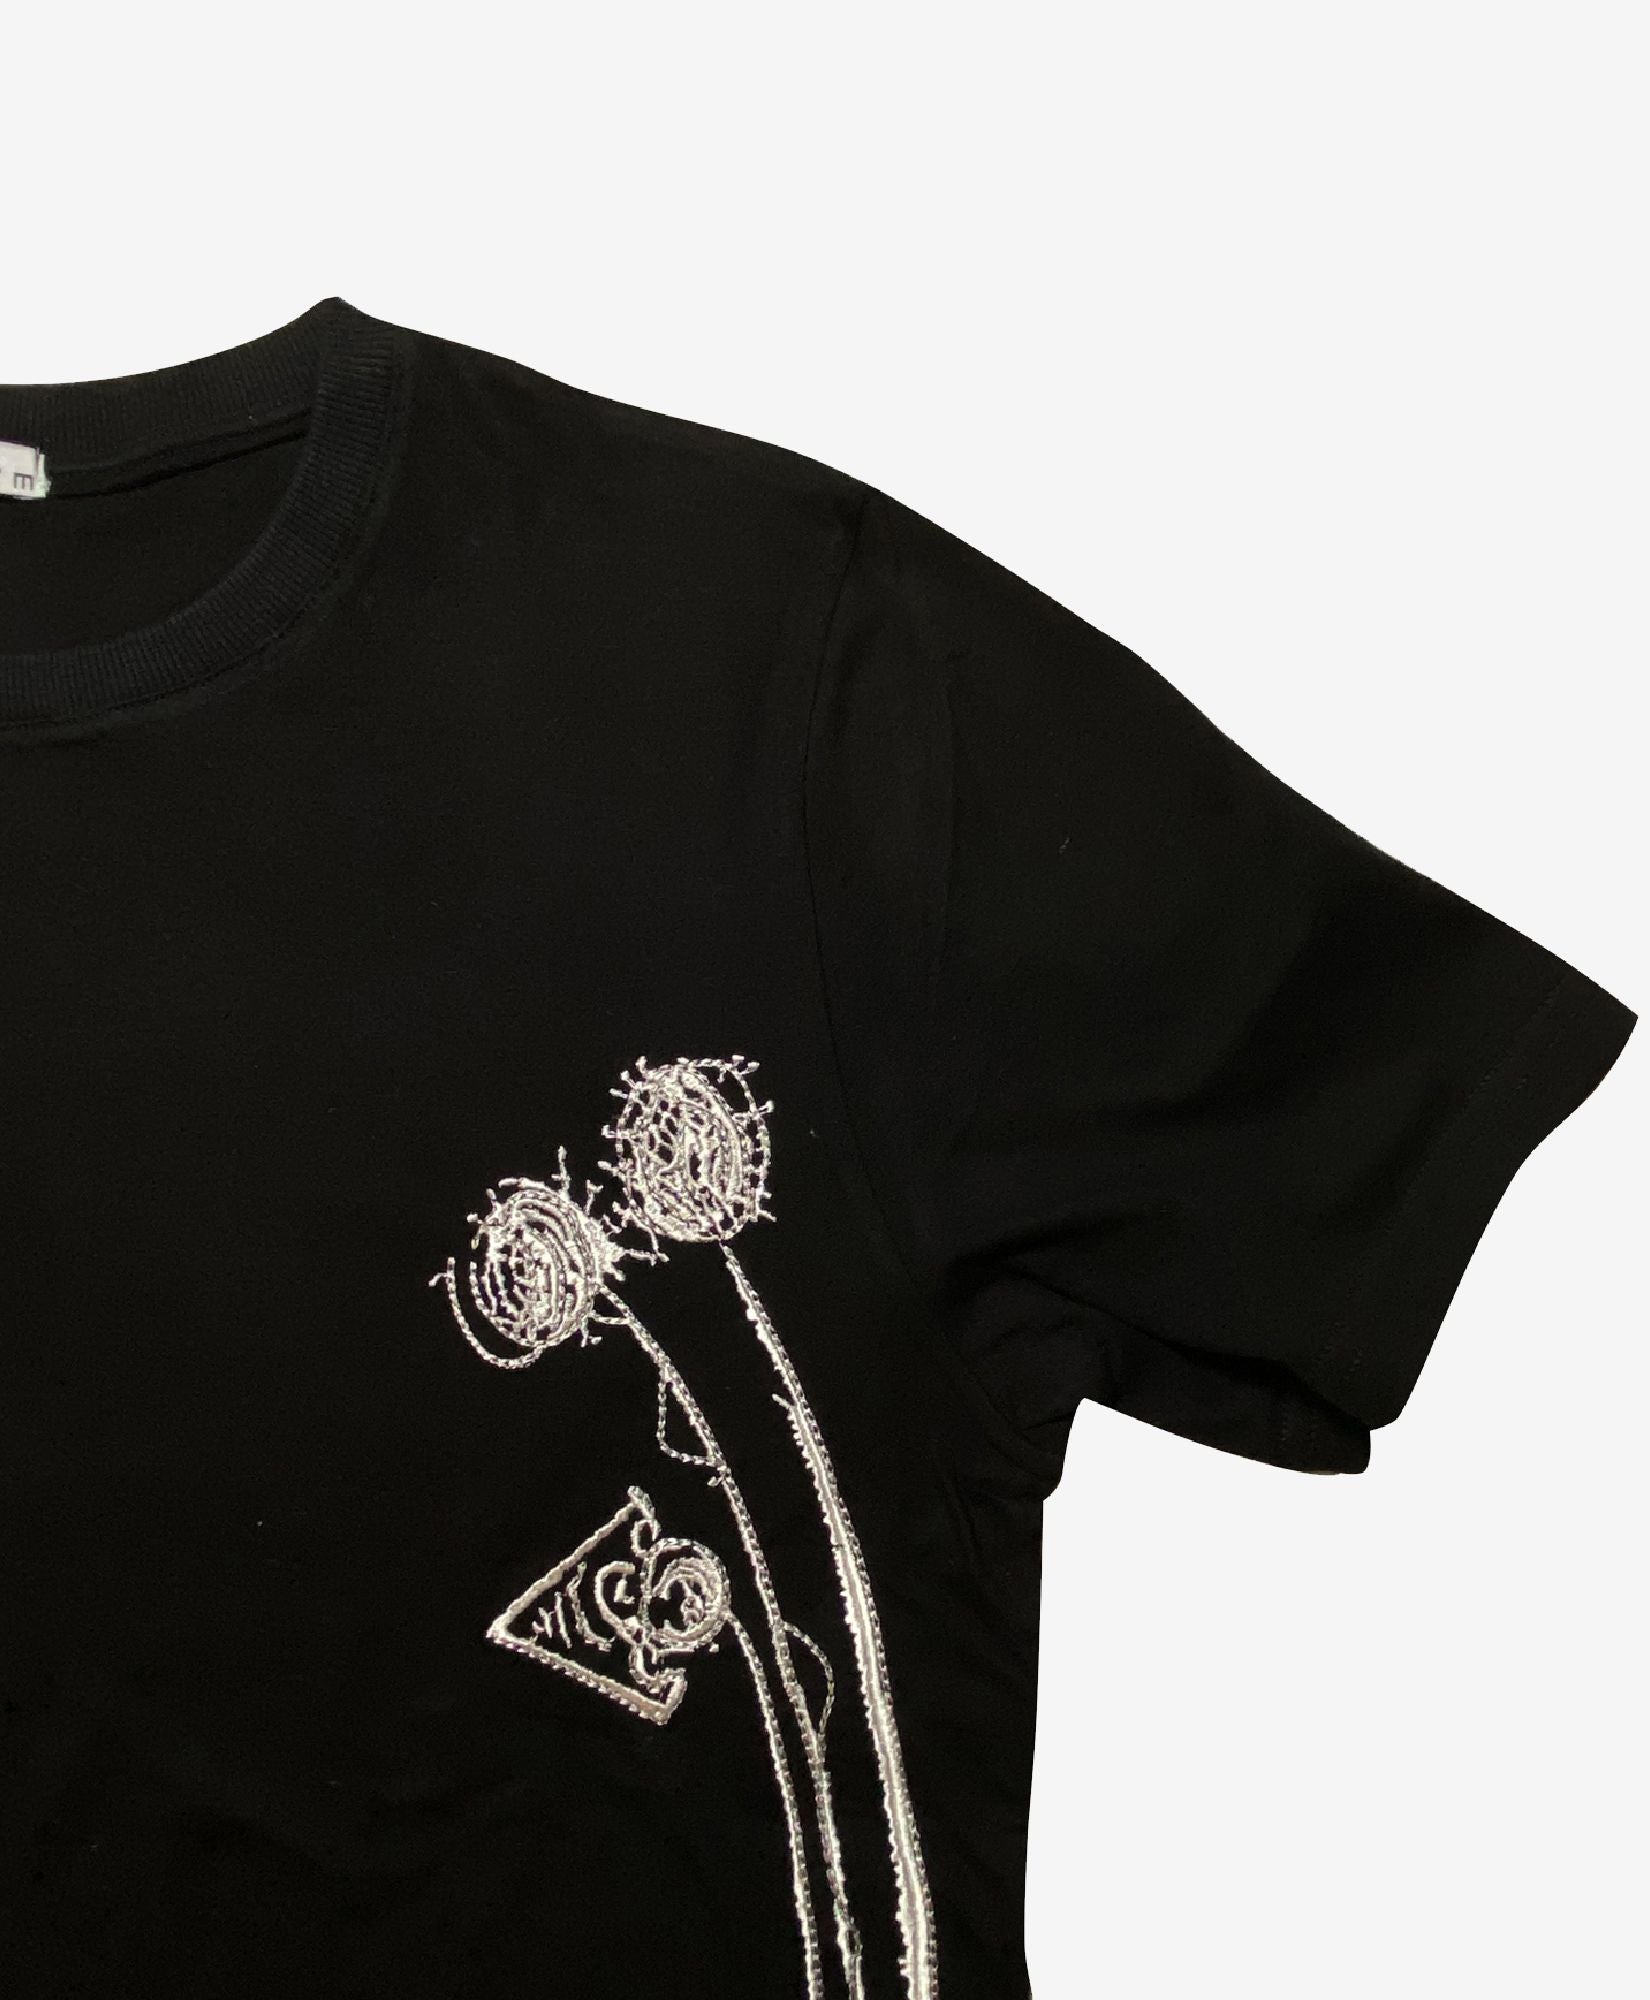 Embroidered Cotton Black T-shirt / Stitched Art on T-shirt